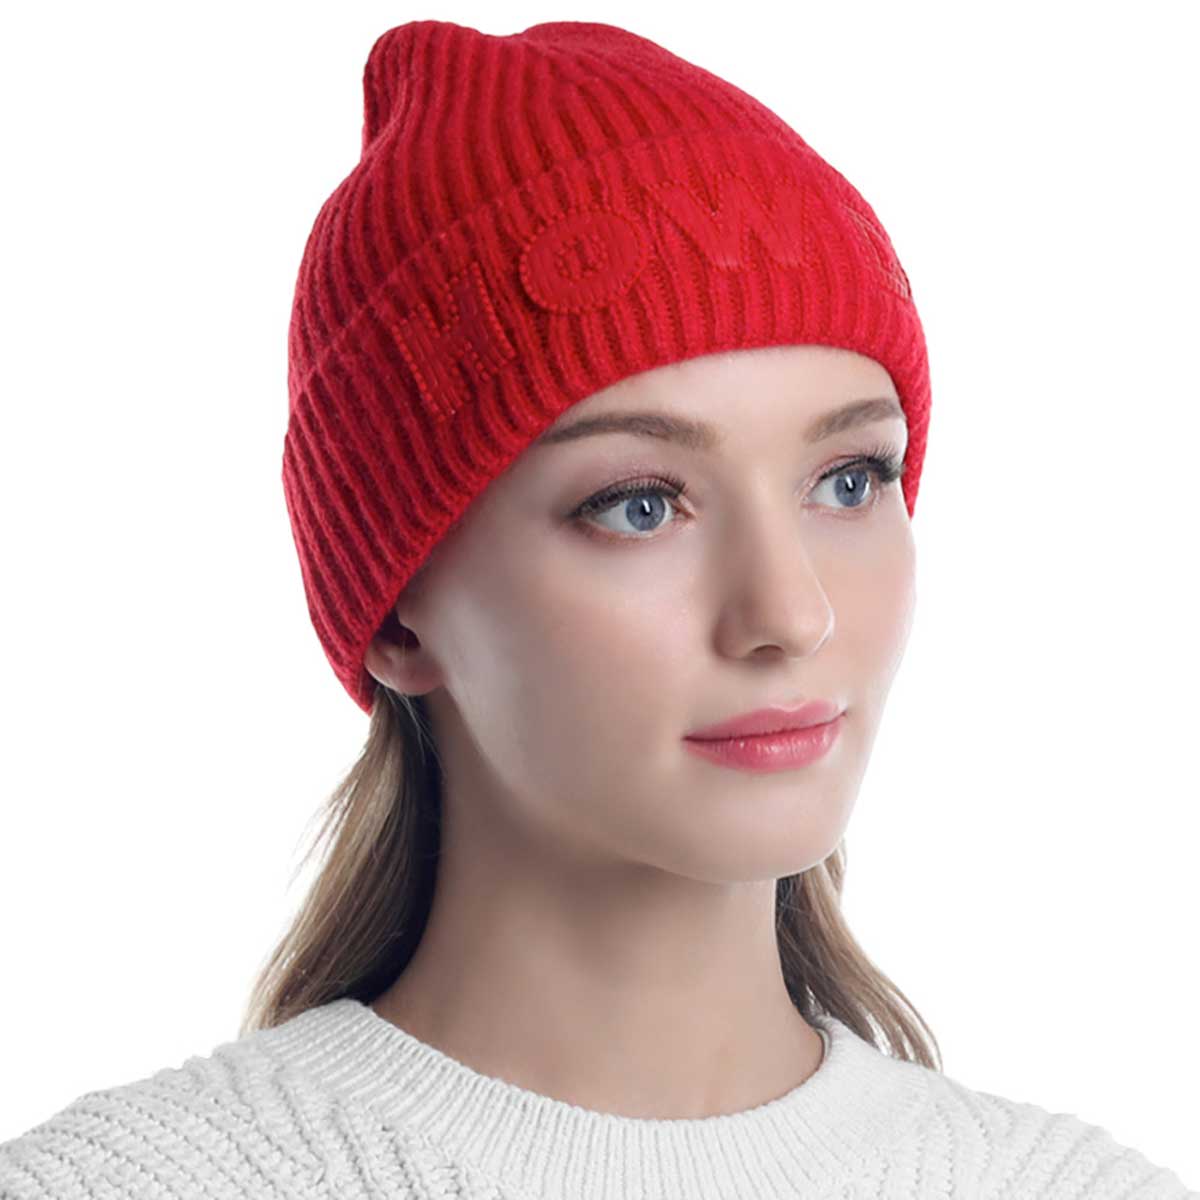 Red Howdy Message Knit Beanie Hat, wear this beautiful beanie hat with any ensemble for the perfect finish before running out the door into the cool air. It perfectly meets your chosen goal.  Perfect gift item for Birthdays, Christmas, Stocking stuffers, Secret Santa, holidays, anniversaries, Valentine's Day, etc. 